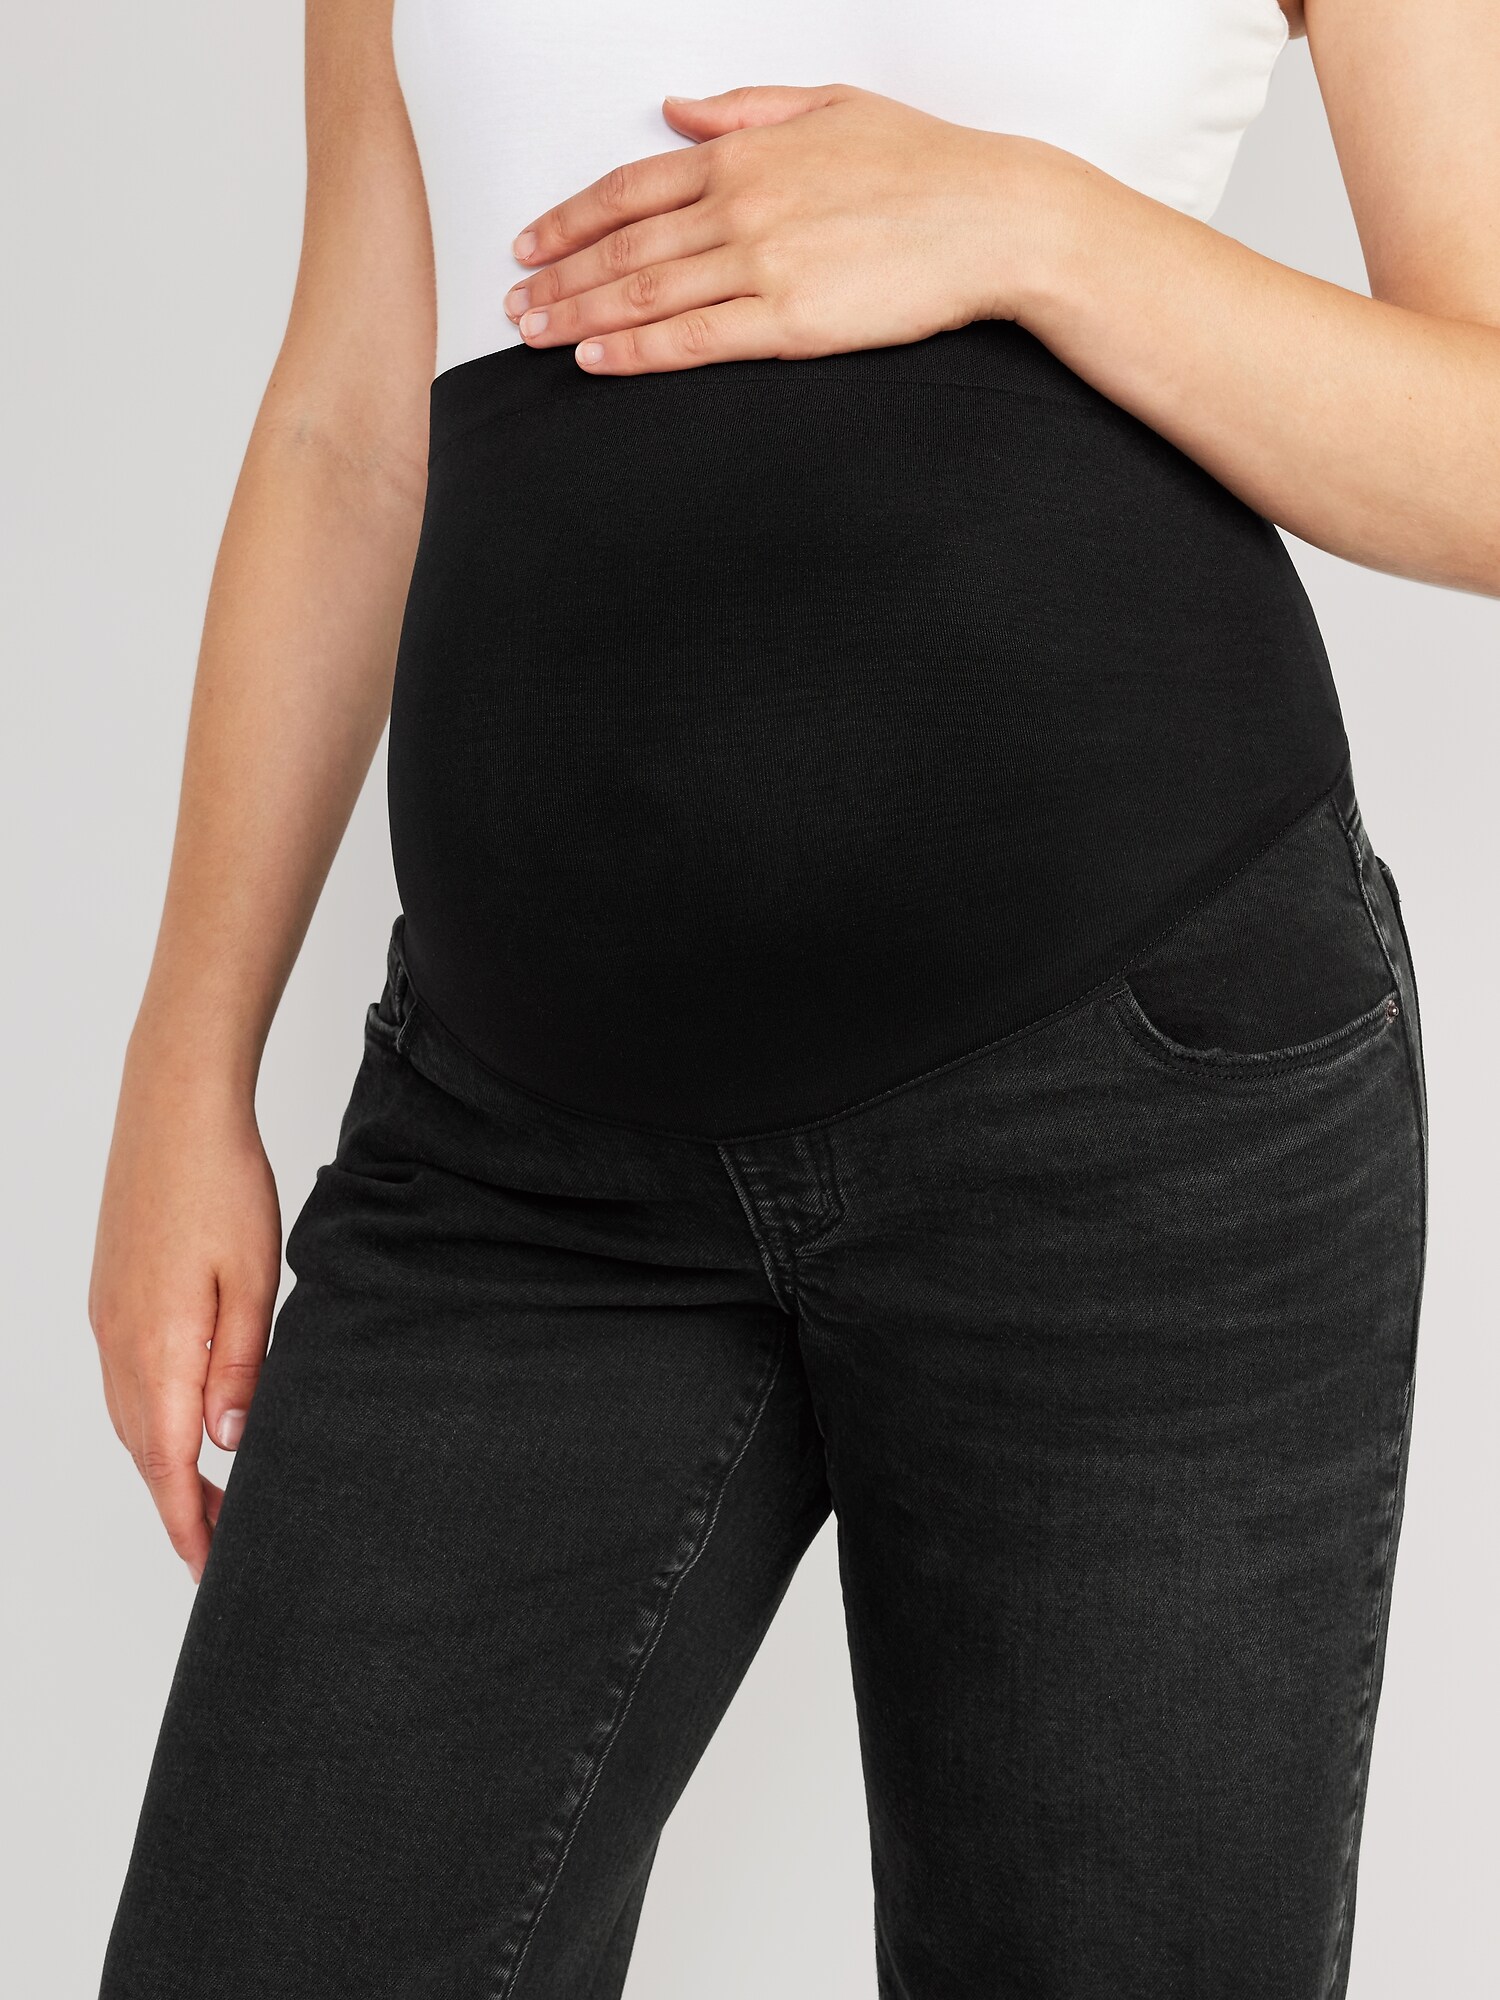 New* Olive J Brand Jeans For A Pea In The Pod Collection Maternity Full  Panel Cargo Skinny Maternity Capris - Motherhood Closet - Maternity  Consignment